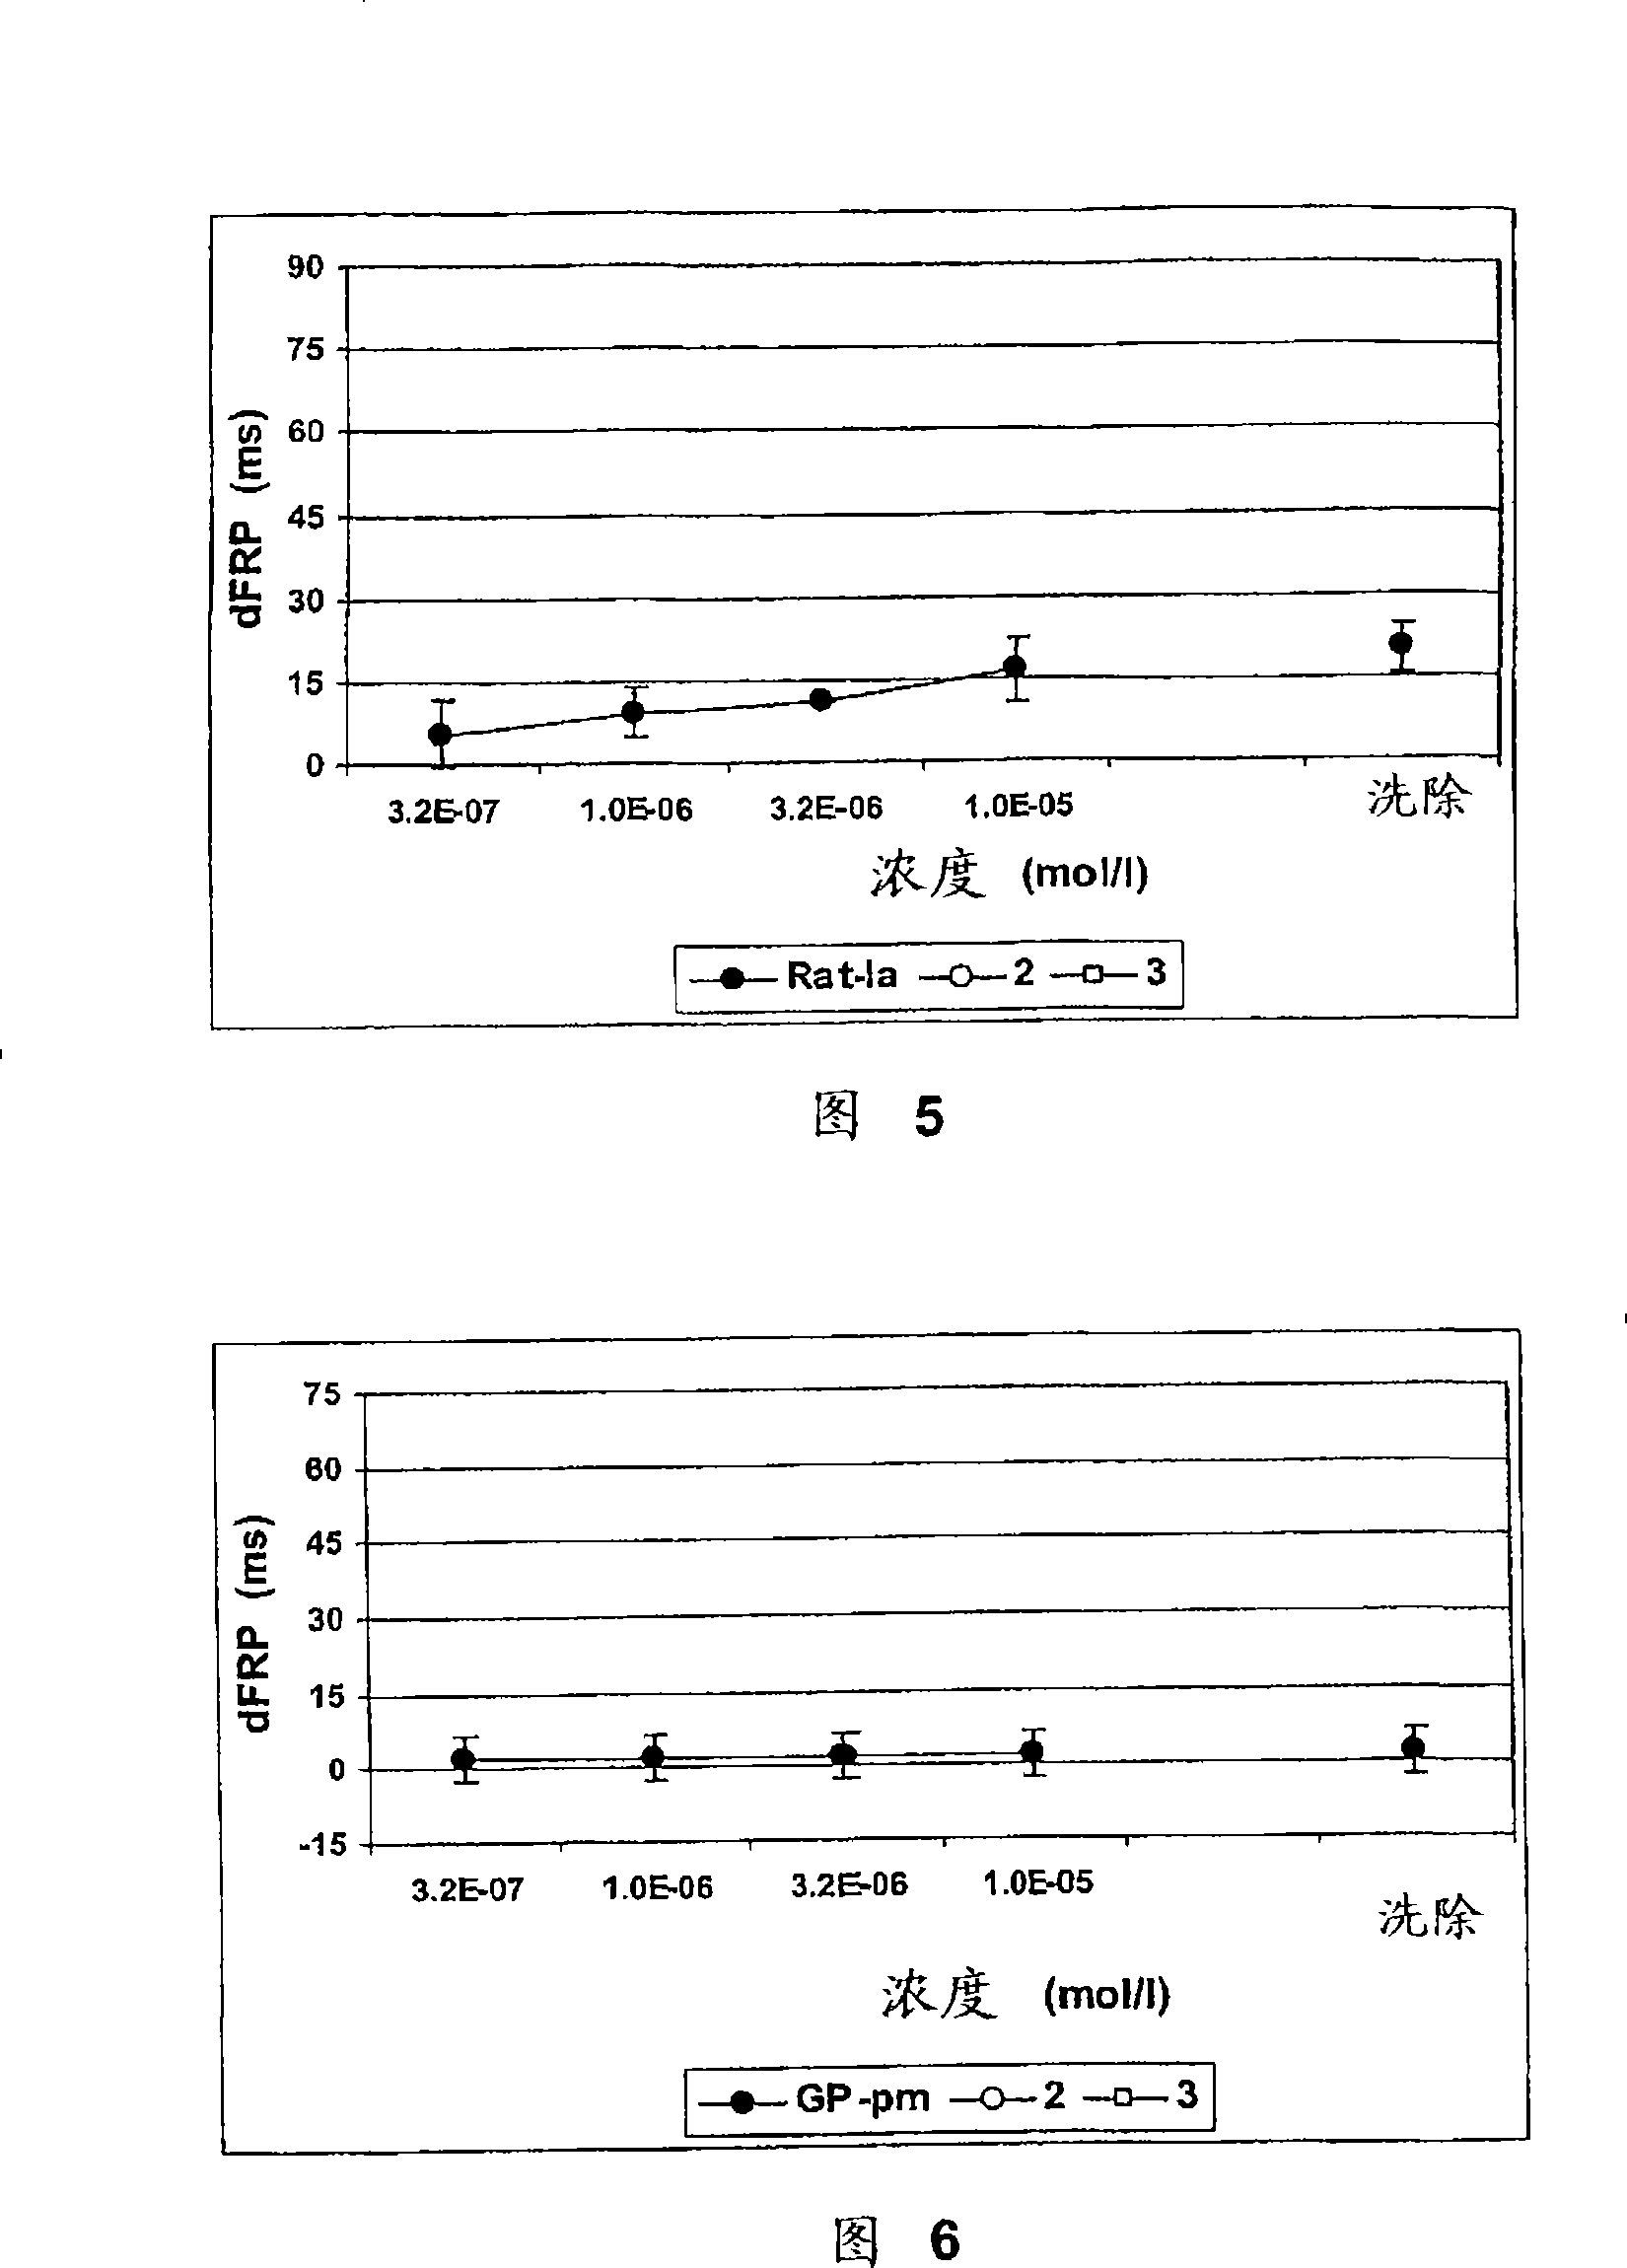 Compounds with Kv4 ion channel activity